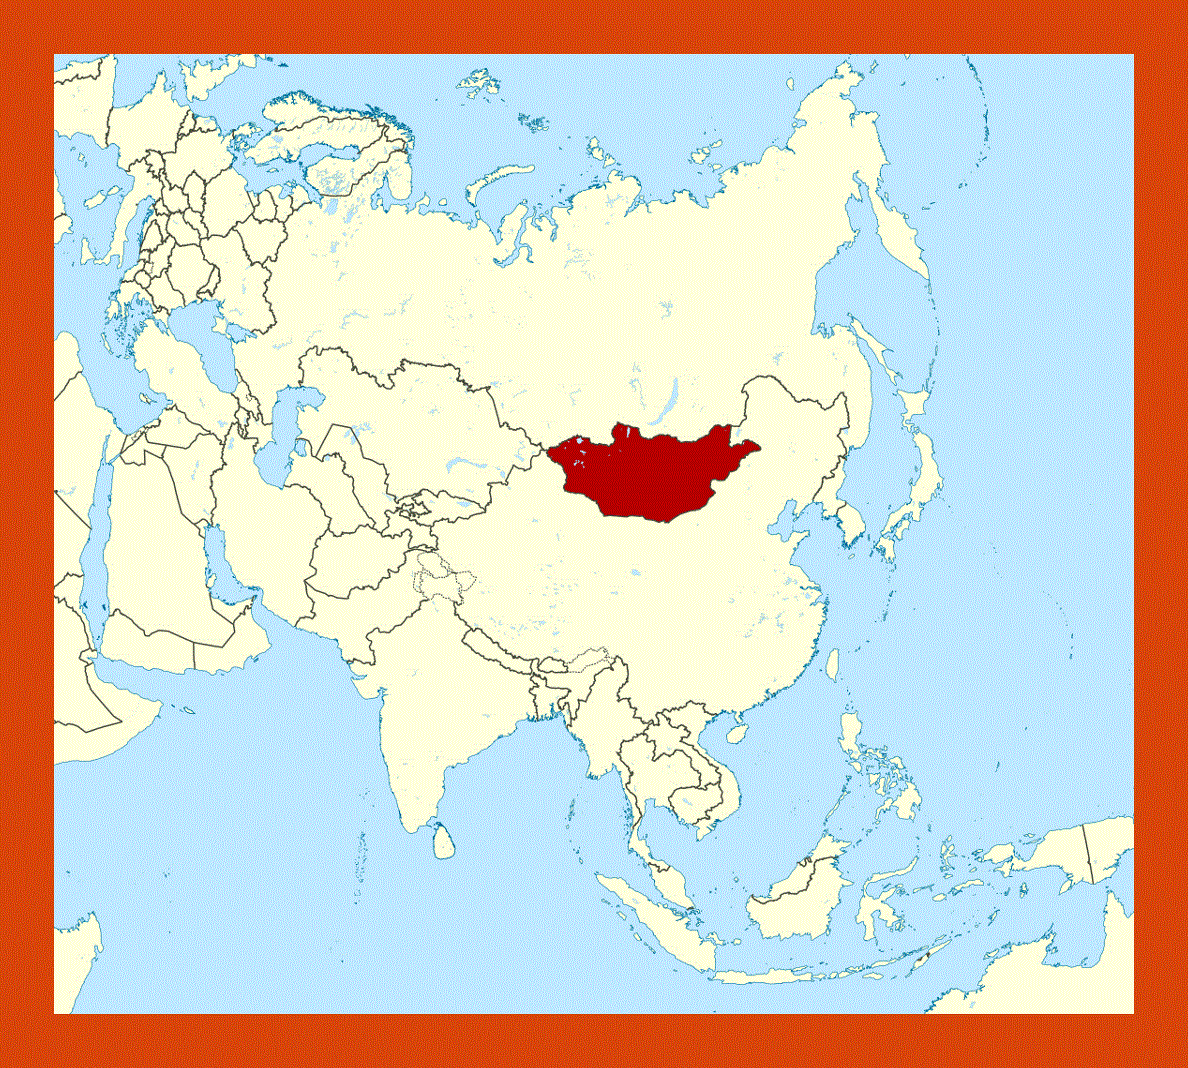 Location map of Mongolia in Asia